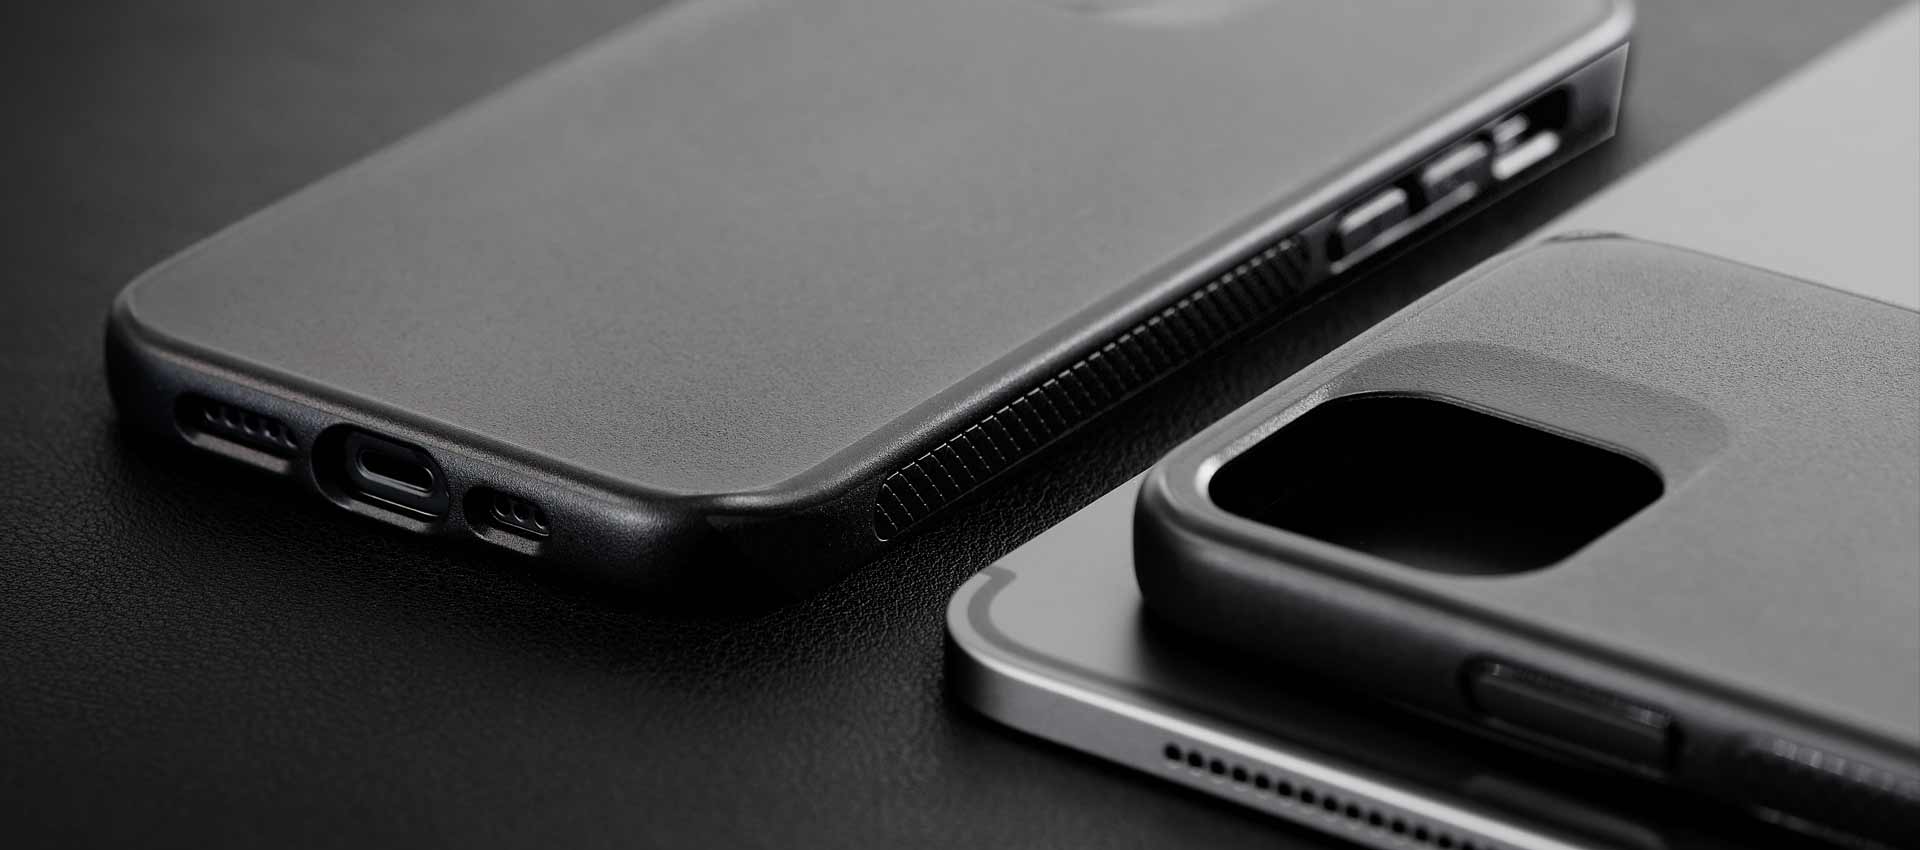 Sheath | Minimalist, Shock-Absorbing iPhone 12 Pro Max Case Gray from Caudabe